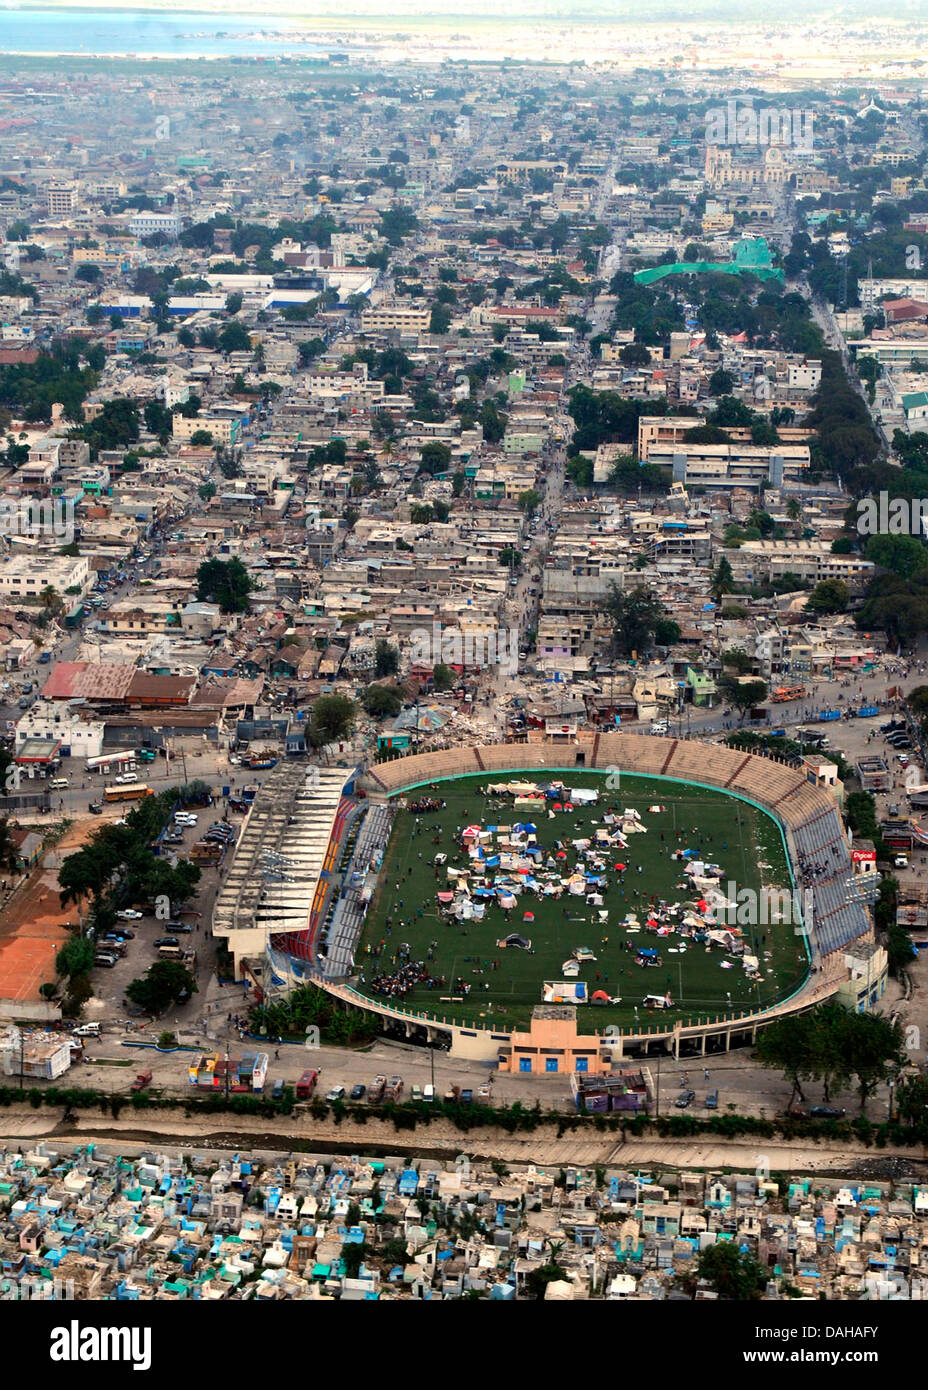 Aerial view refugee tents in a soccer stadium amid destroyed buildings in the aftermath of a 7.0 magnitude earthquake that killed 220,000 people January 18, 2010 in Port-au-Prince, Haiti. Stock Photo